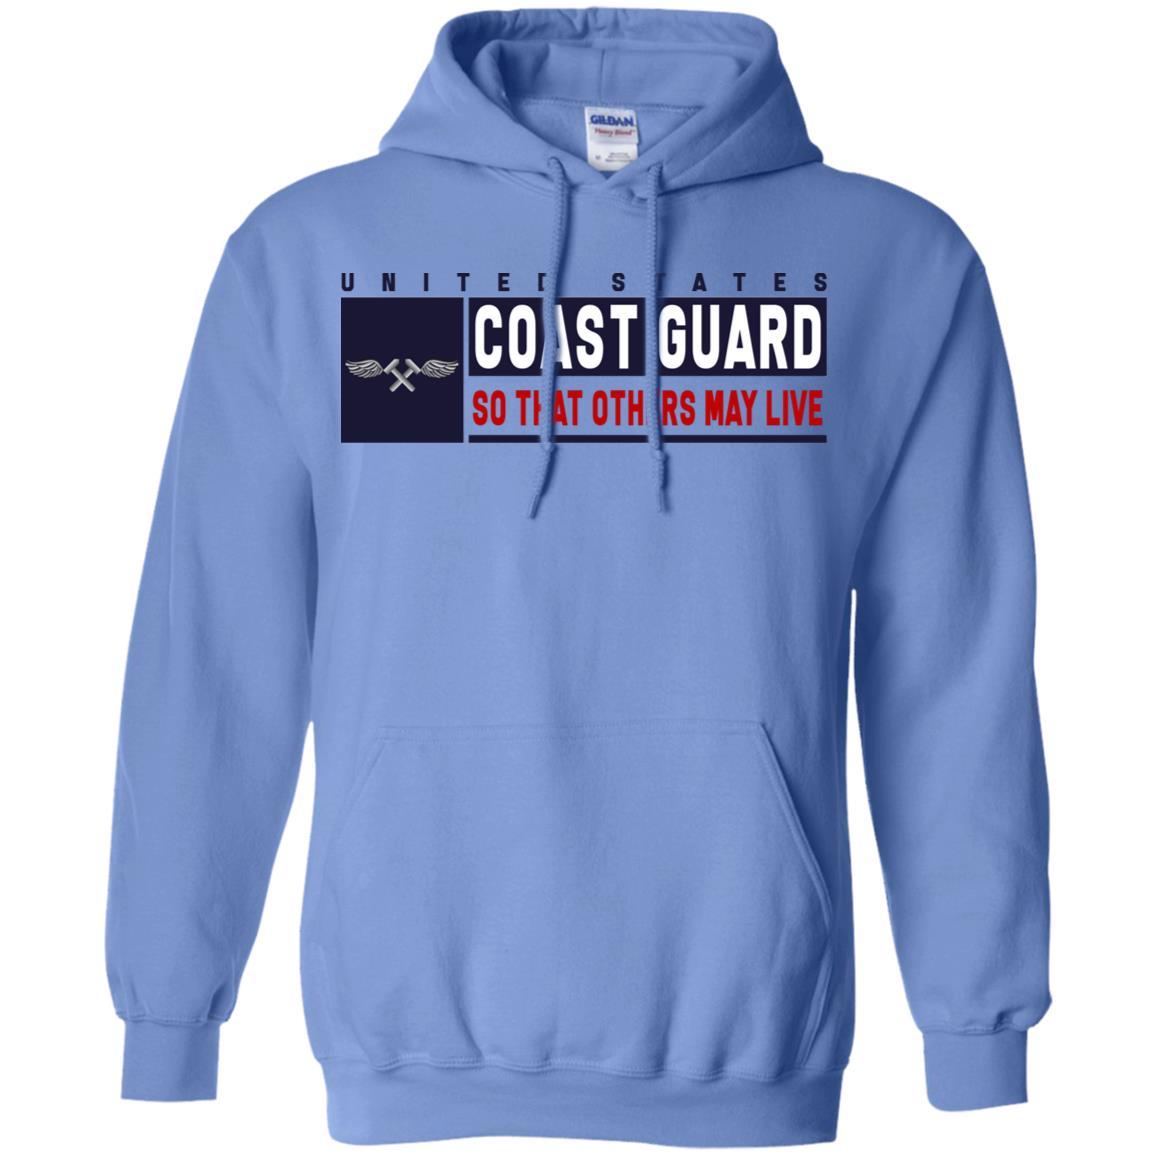 US Coast Guard Aviation Metalsmith AM Logo- So that others may live Long Sleeve - Pullover Hoodie-TShirt-USCG-Veterans Nation